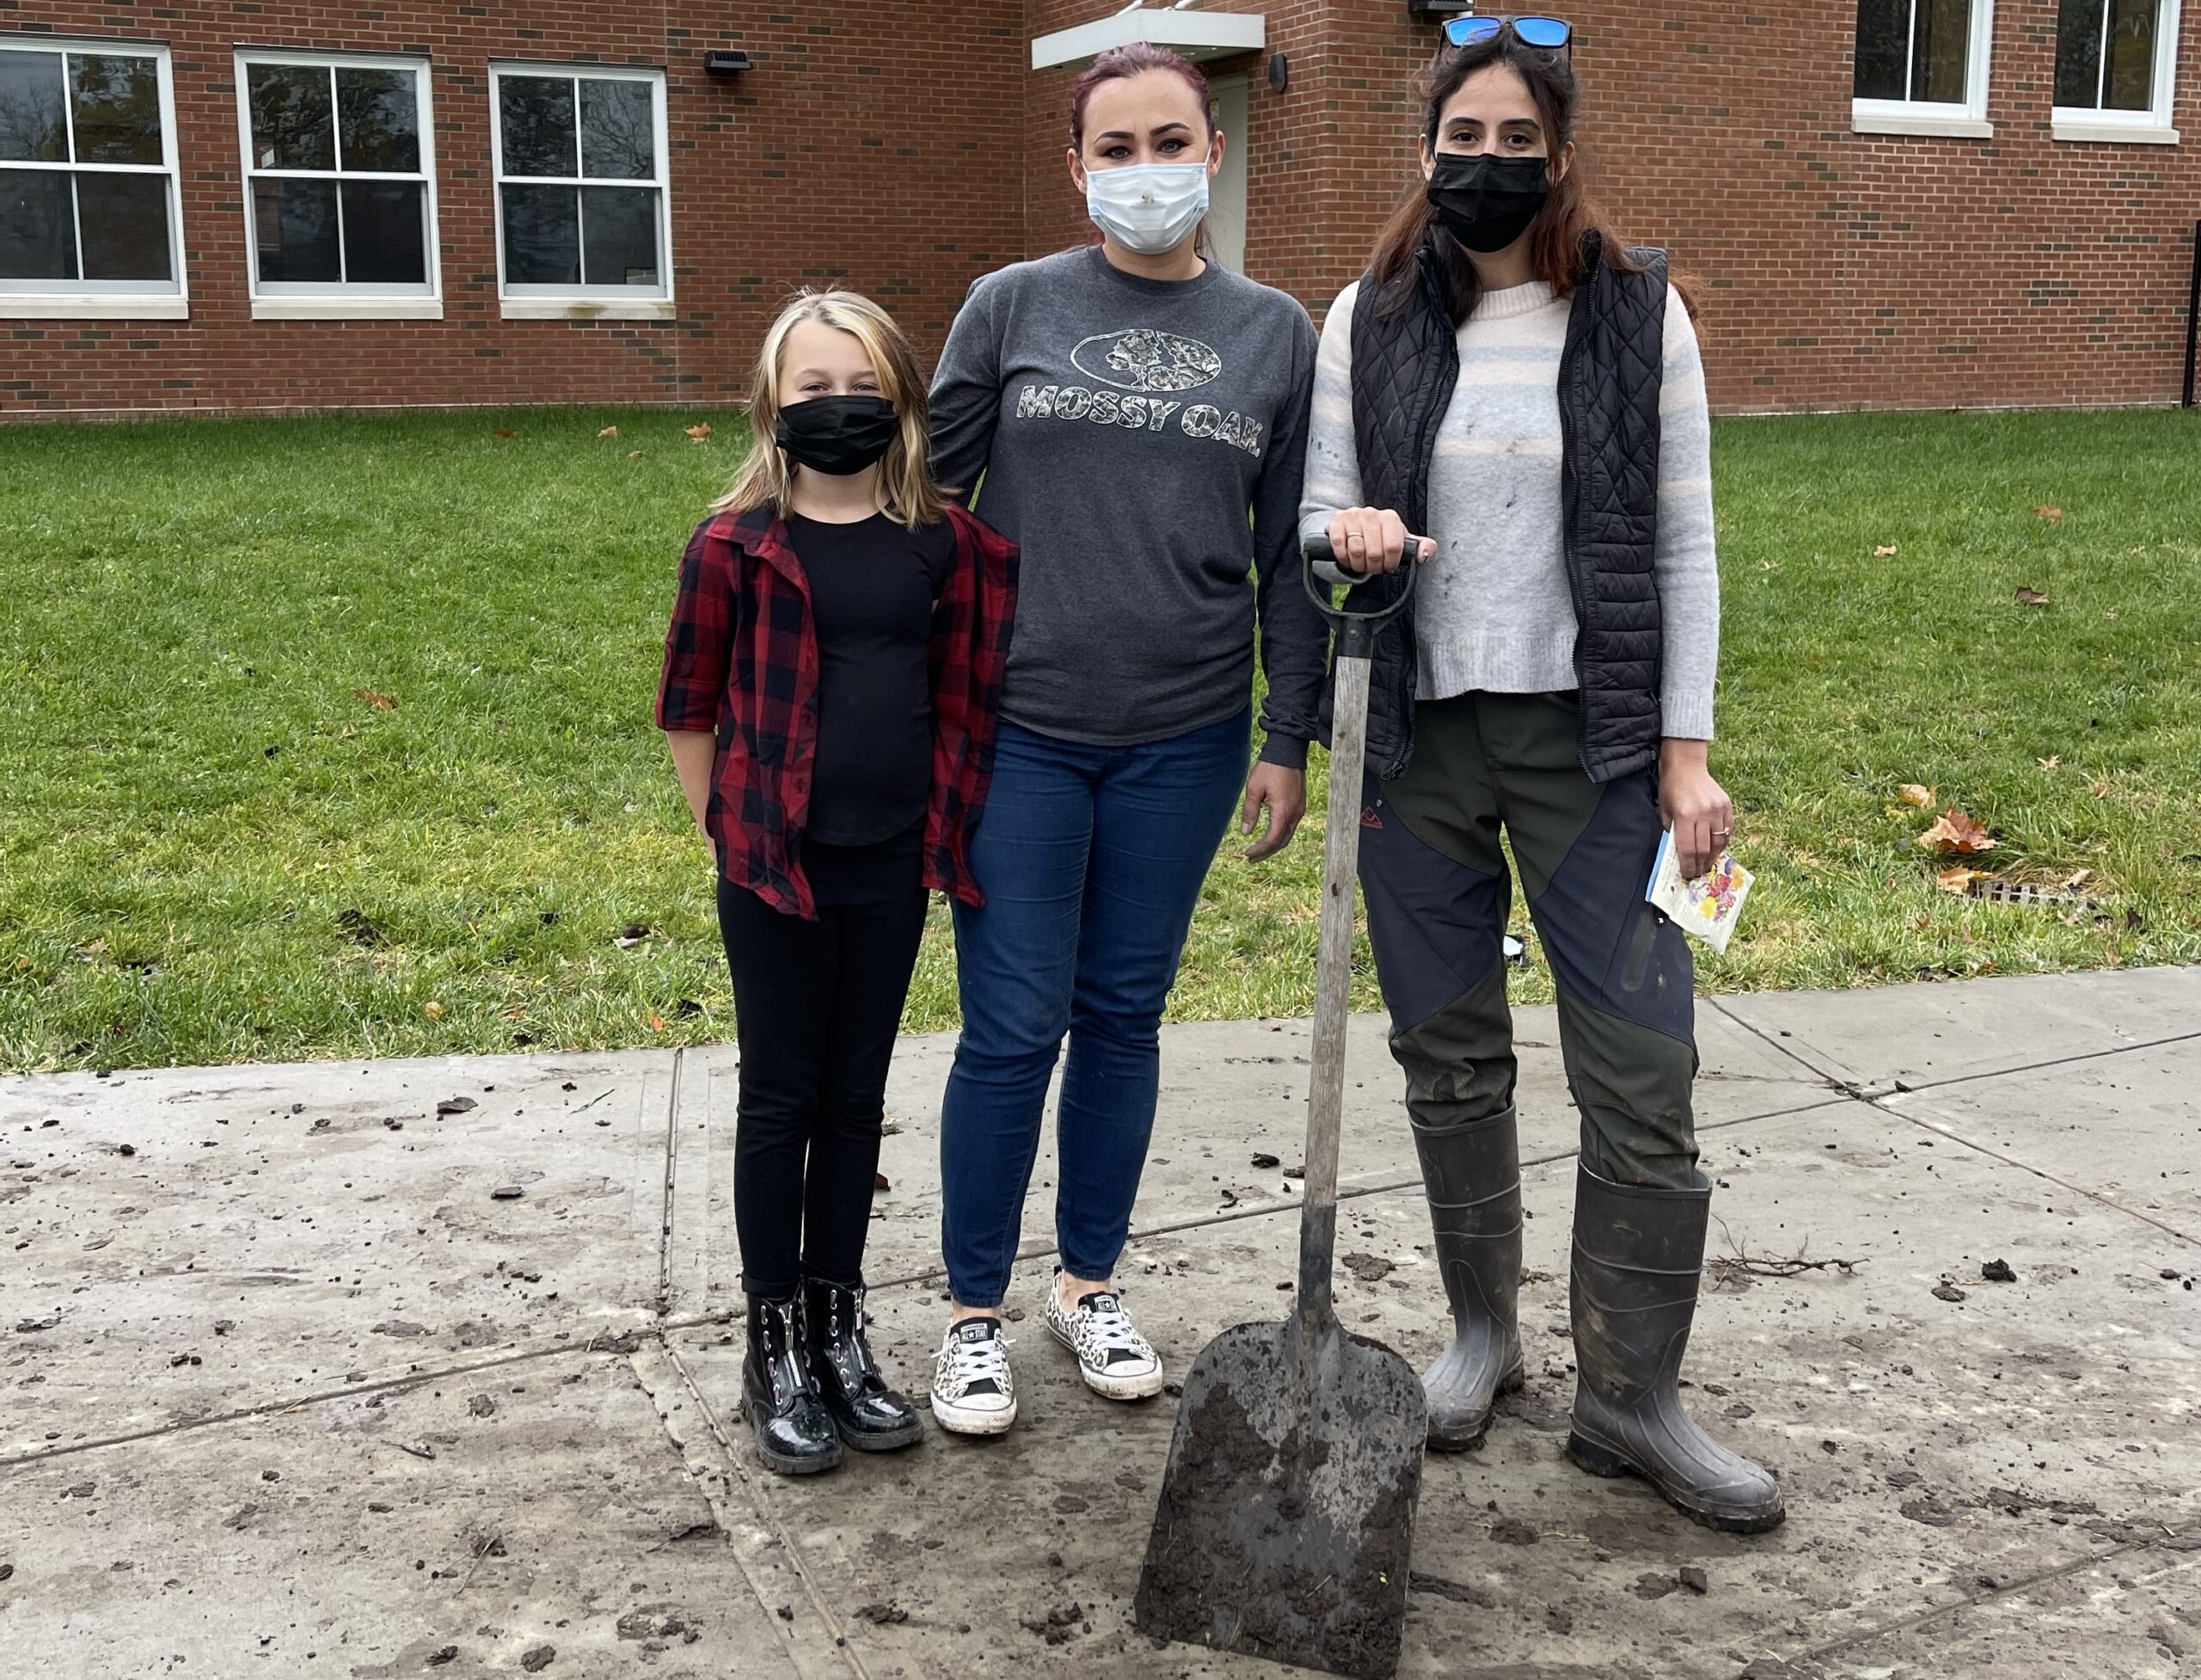 two adult females and a young girl stand in front of an elementary school and one adult is holding a large metal garden shovel